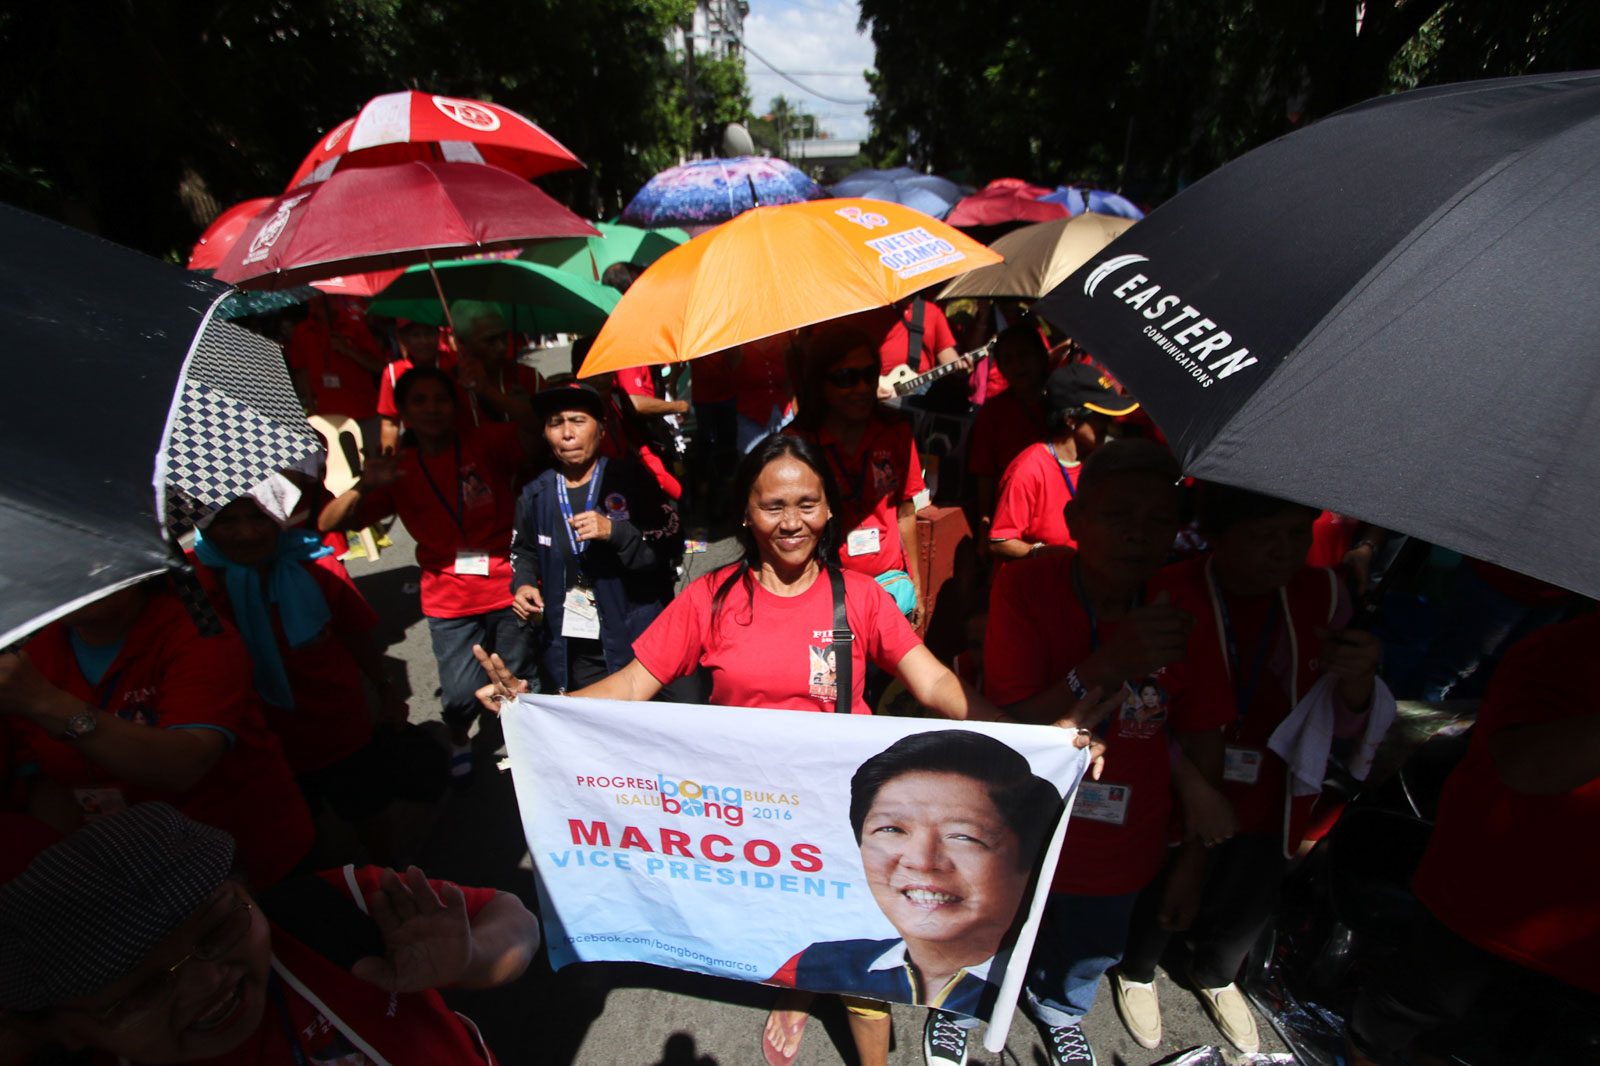 Business groups call Marcos’ election protest a ‘political distraction’